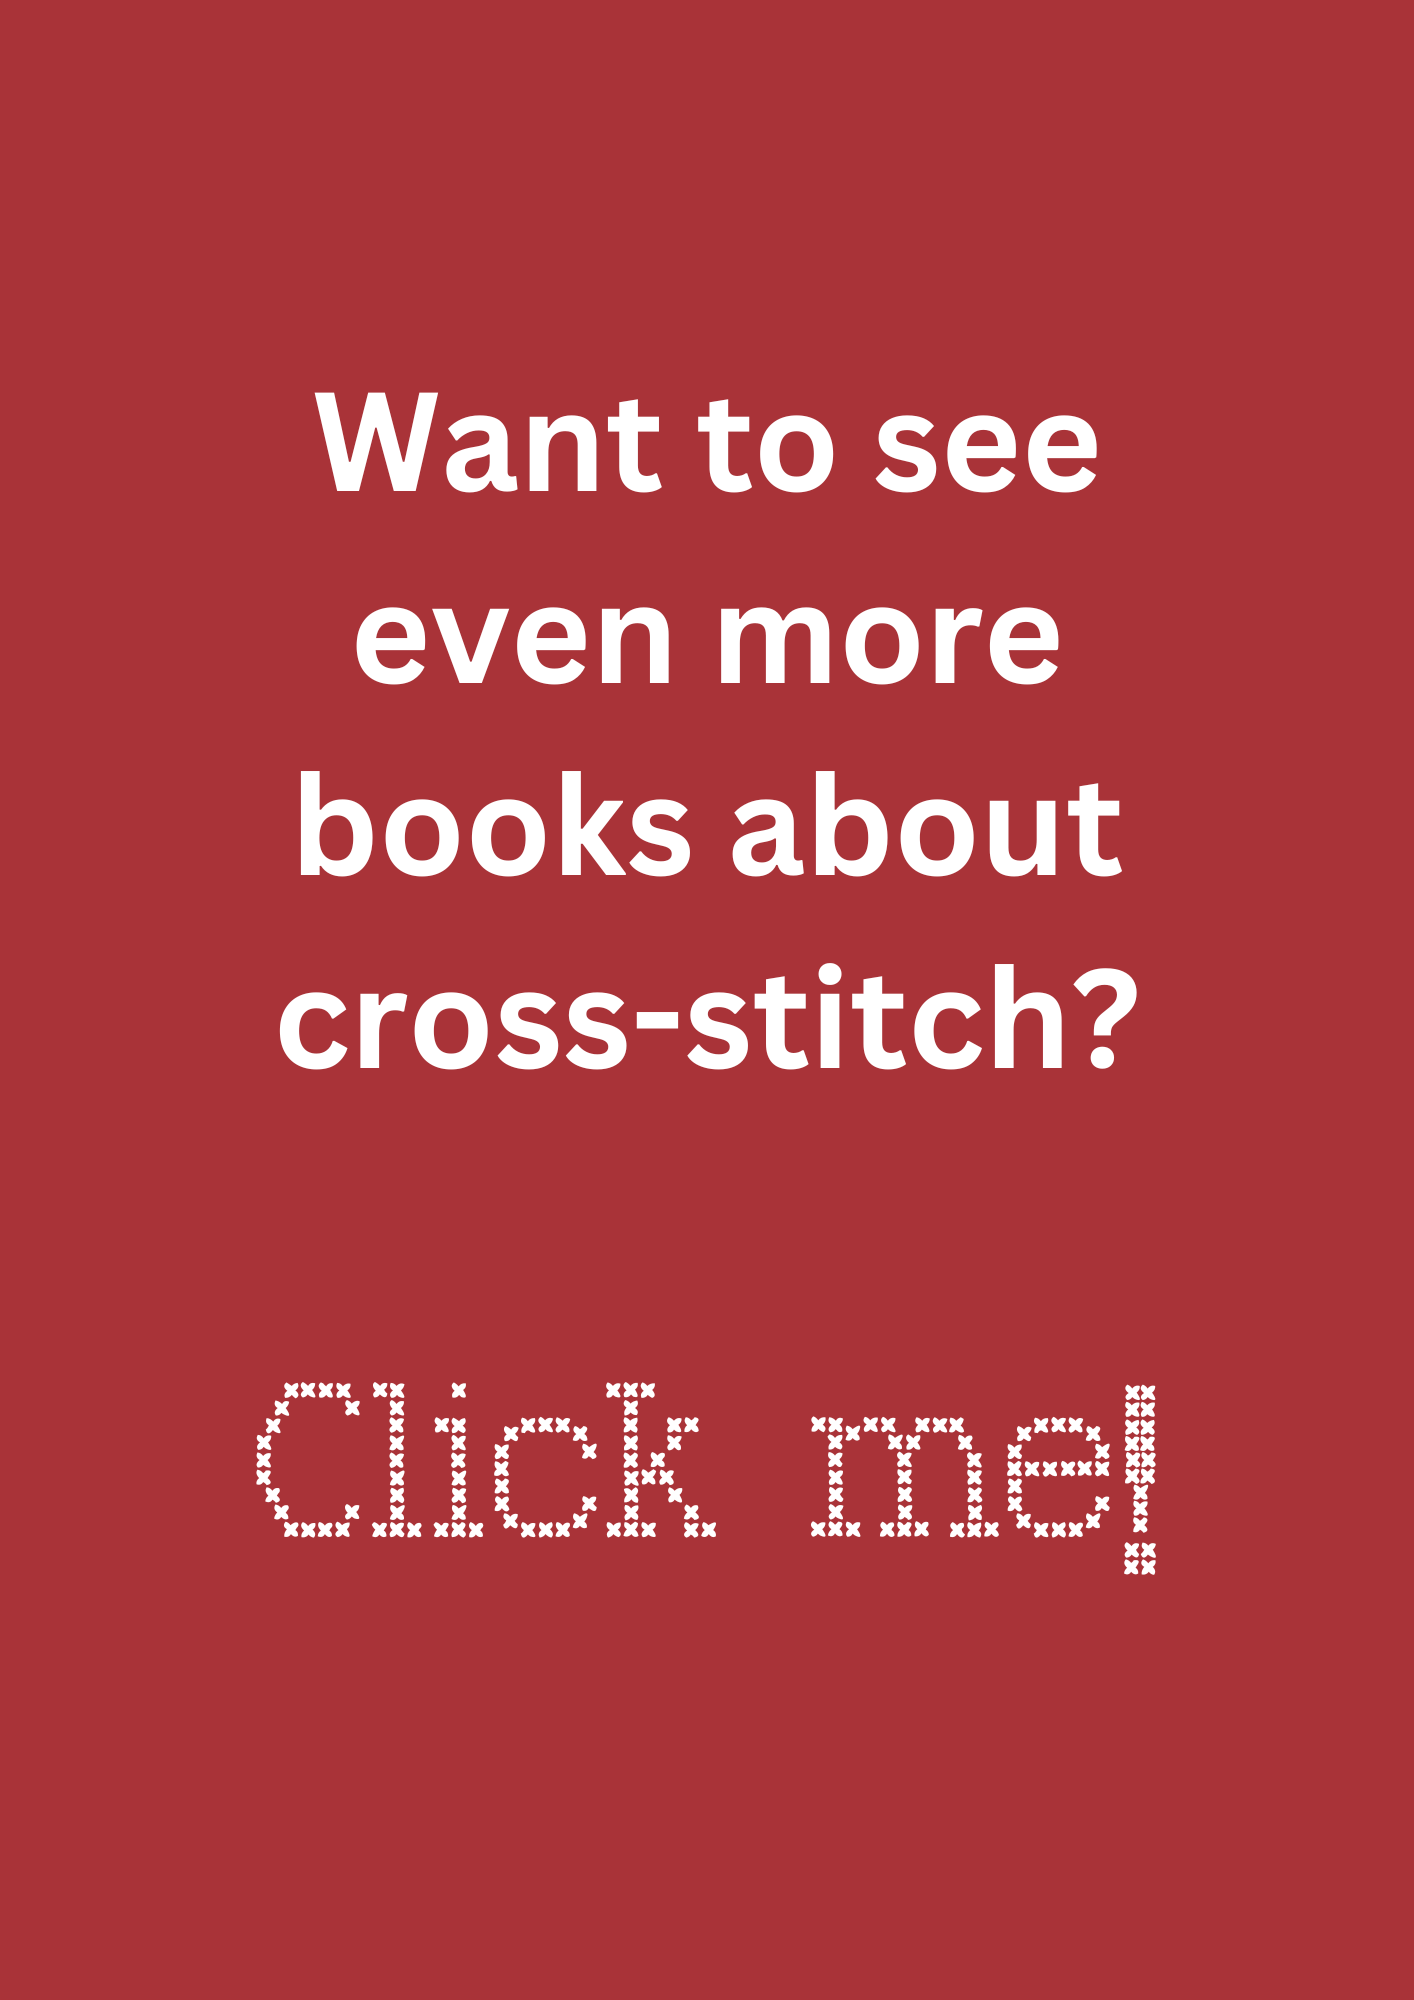 "Want to see even more books about cross-stitch? Click me!"